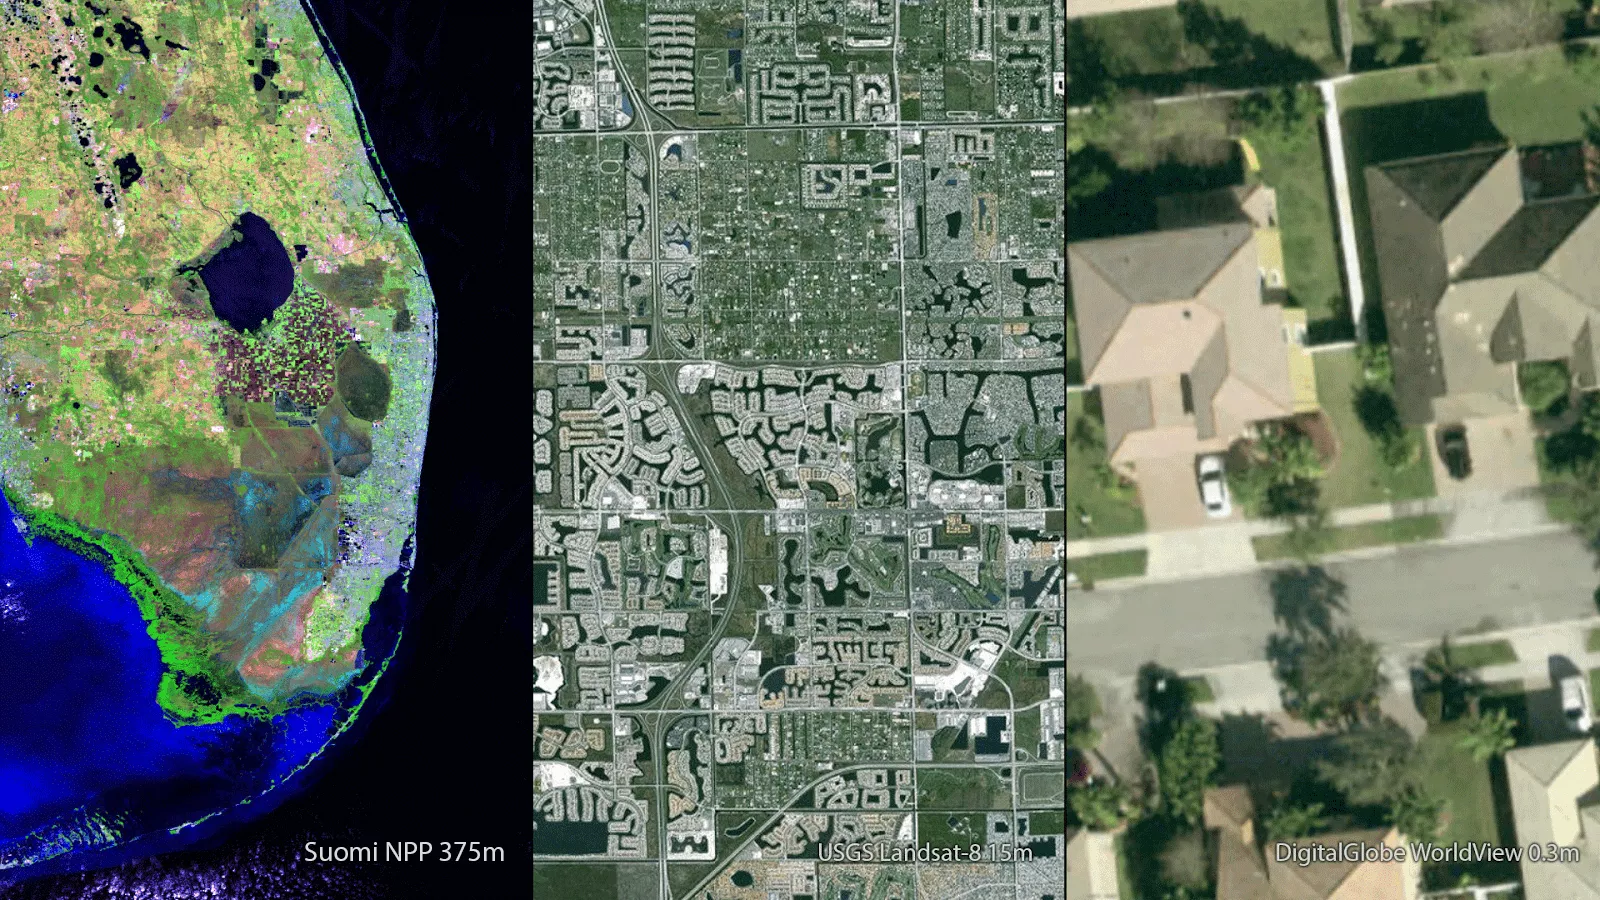 A triptych of satellite images showing Florida - the left image shows much of the tip of Florida from a distance, the middle image shows part of Florida and individual roads can be seen, the right image shows individual houses in a Google Maps-like view